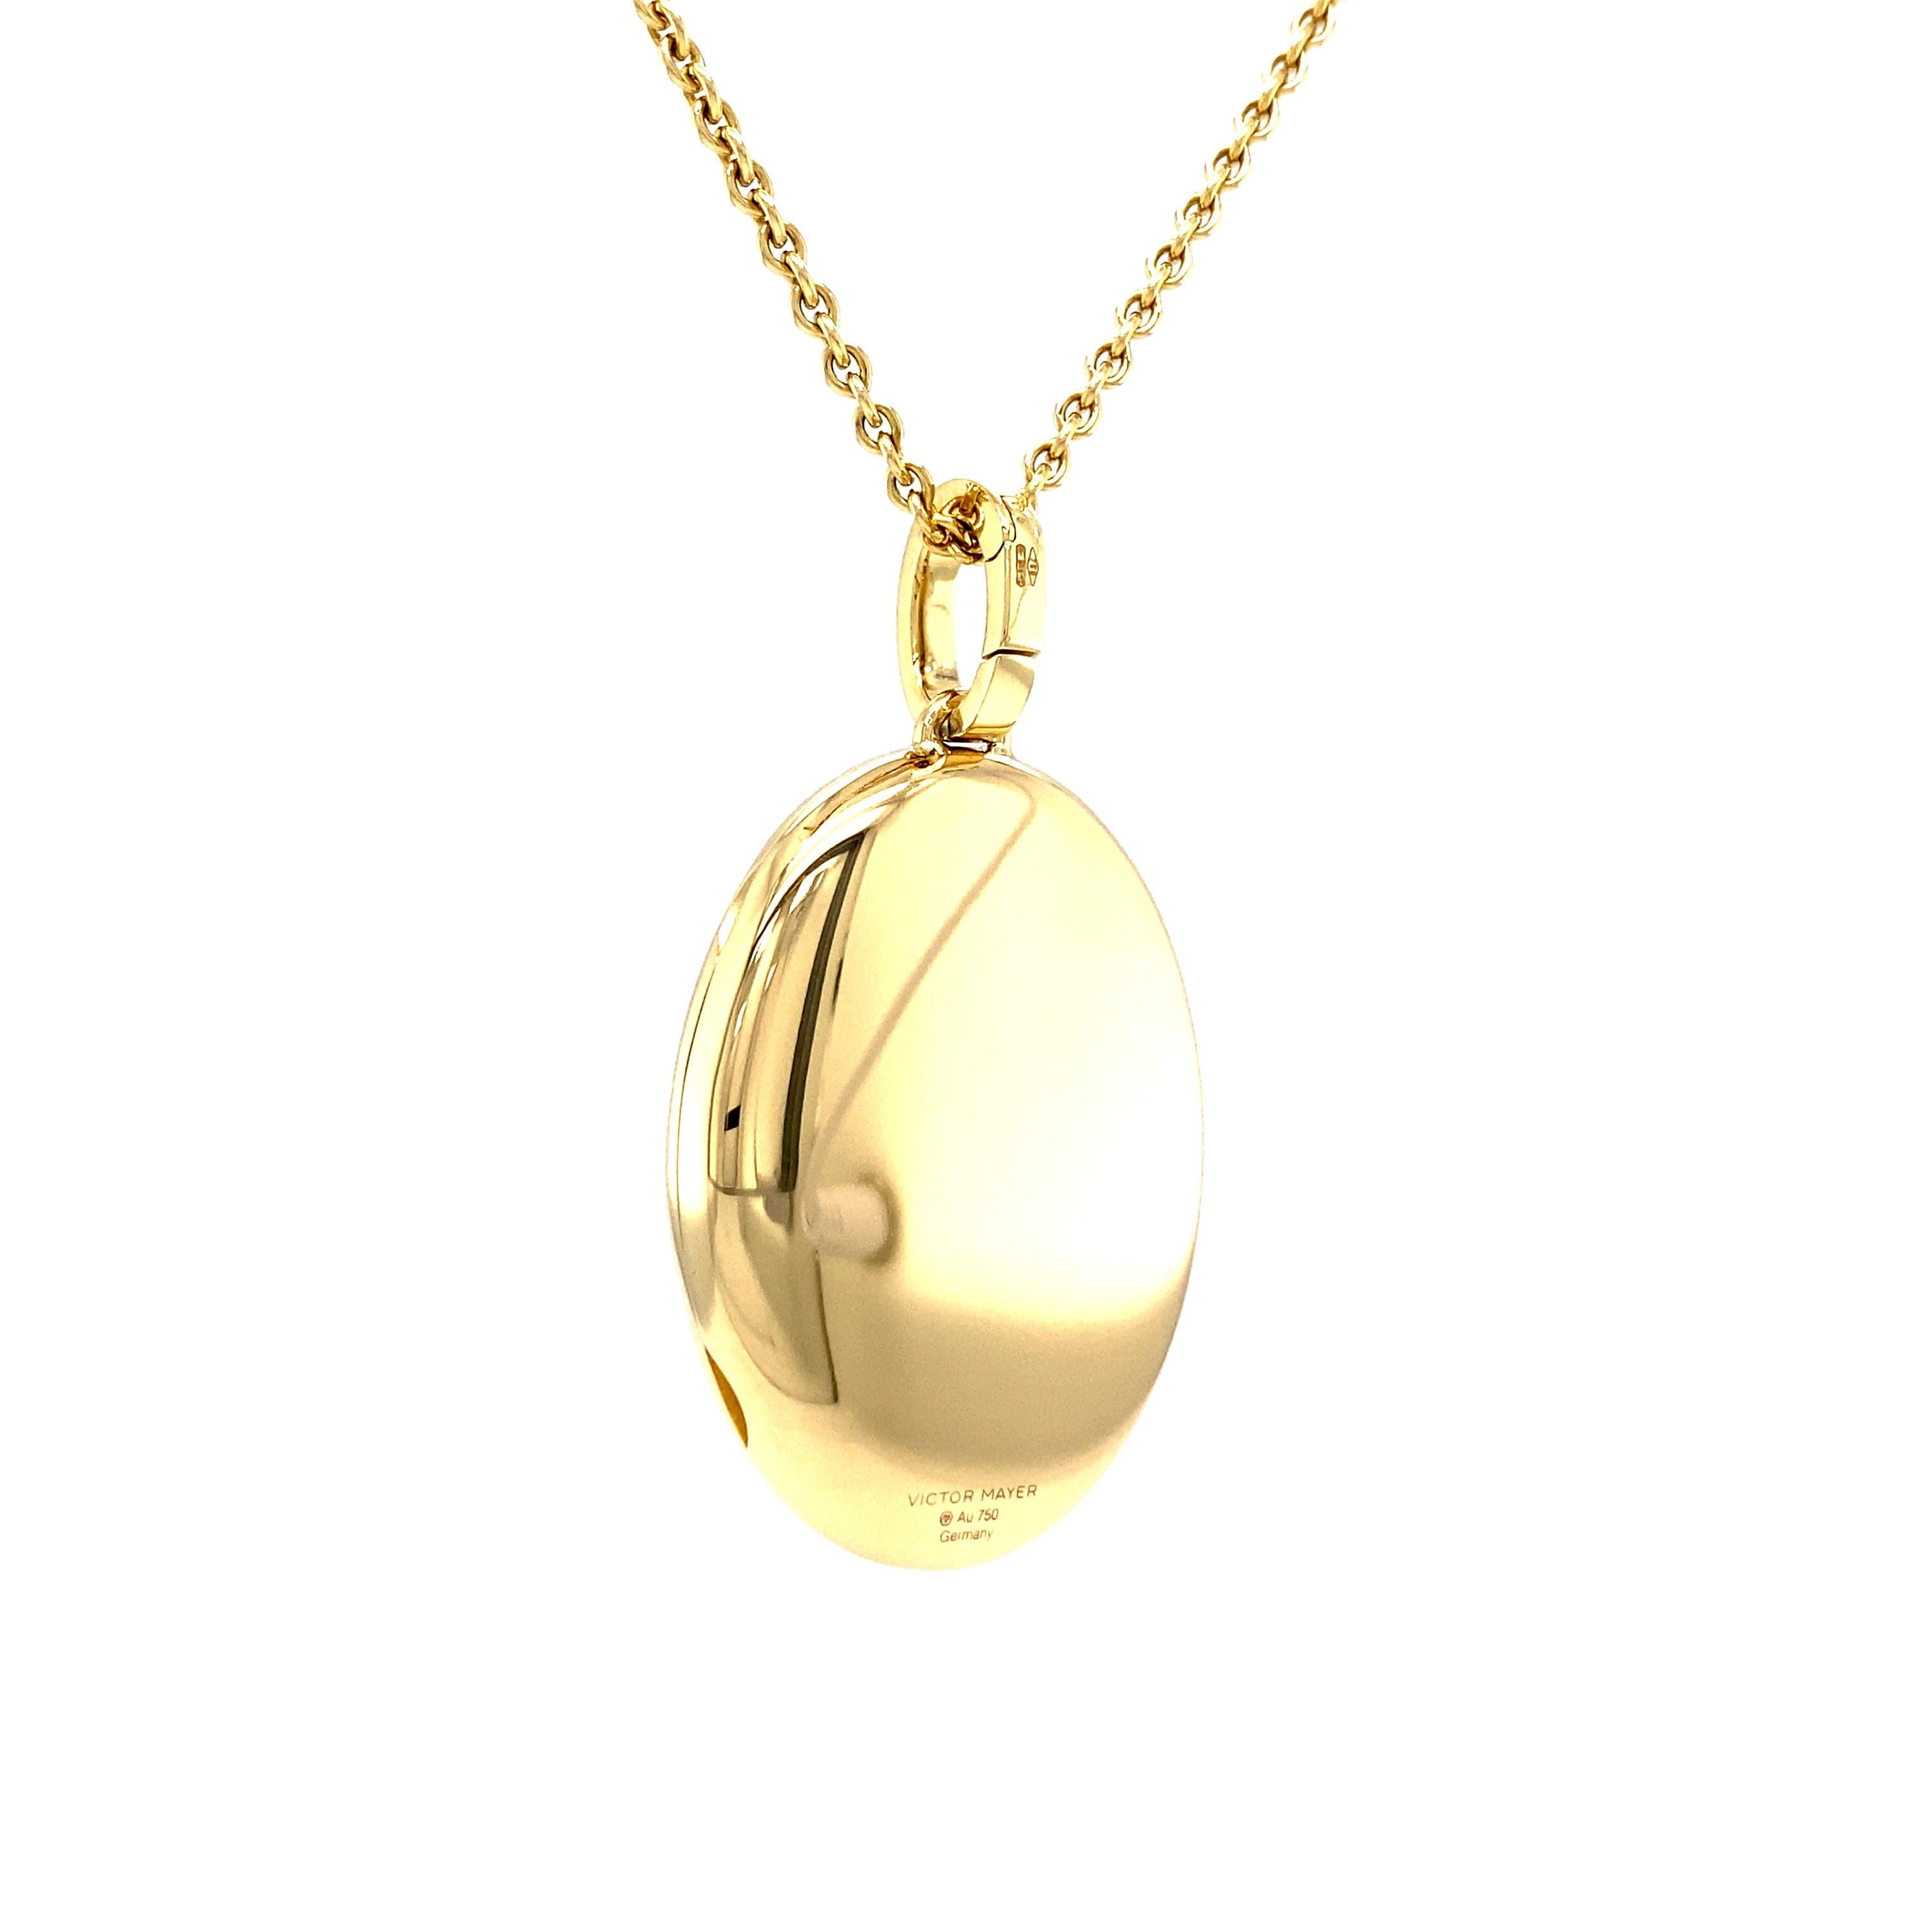 Oval Locket Pendant Necklace Scroll Engraving 18k Yellow Gold 23.0 x 32.0 mm For Sale 3